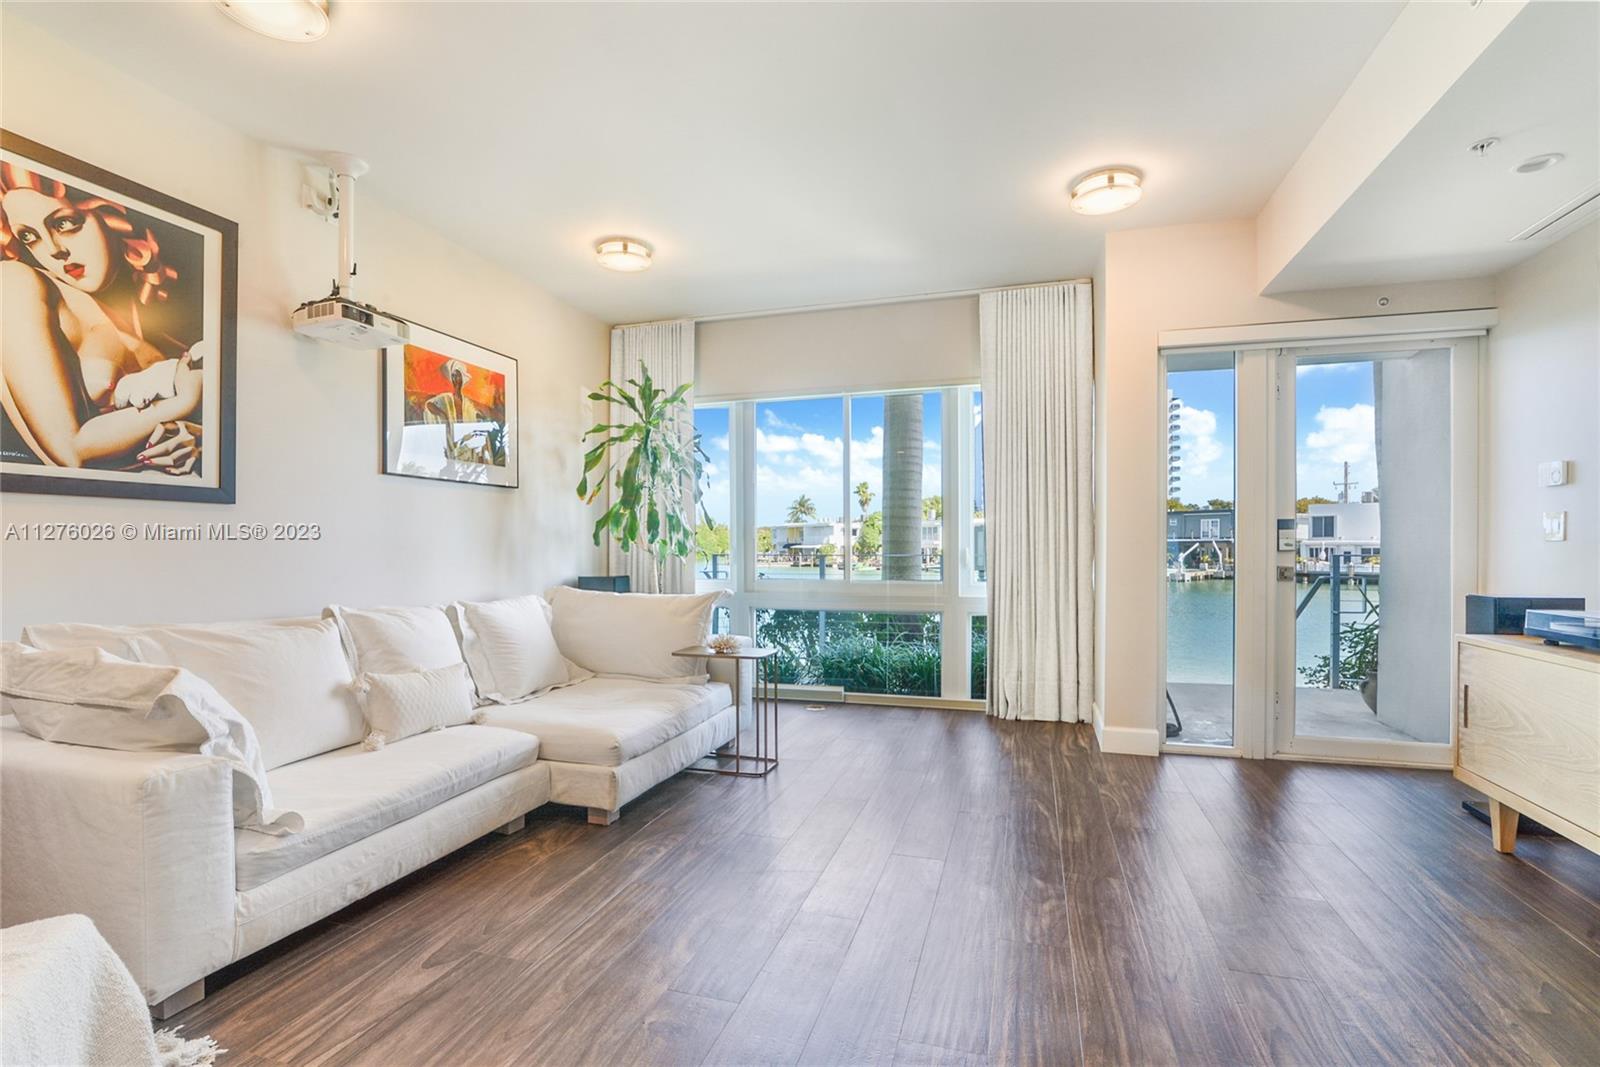 Stunning Luxury Waterfront Townhome with Boat Dock and New Lift. This 2015 Modern 4bed/4.5bath gem with 2022 upgrades features a Private Rooftop Terrace with Summer Kitchen and Intracoastal Turquoise Water Views, Lounge with cinema/entertainment system, private elevator, 2 car garage, EV Fast Charger, Savant Smart Home system, DICA Kitchen, Miele appliances, Cafe refrigerator. Italian ceramic floors, and California Closets. Water purification, and softener, wind sensor retractable awning. Hardwired internet, Nest, Ring security. Normandy Shores boasts a golf course, tennis courts, children's playground, outdoor gym and clubhouse dining. Iris On The Bay is a few blocks to the beach, dining and shopping.